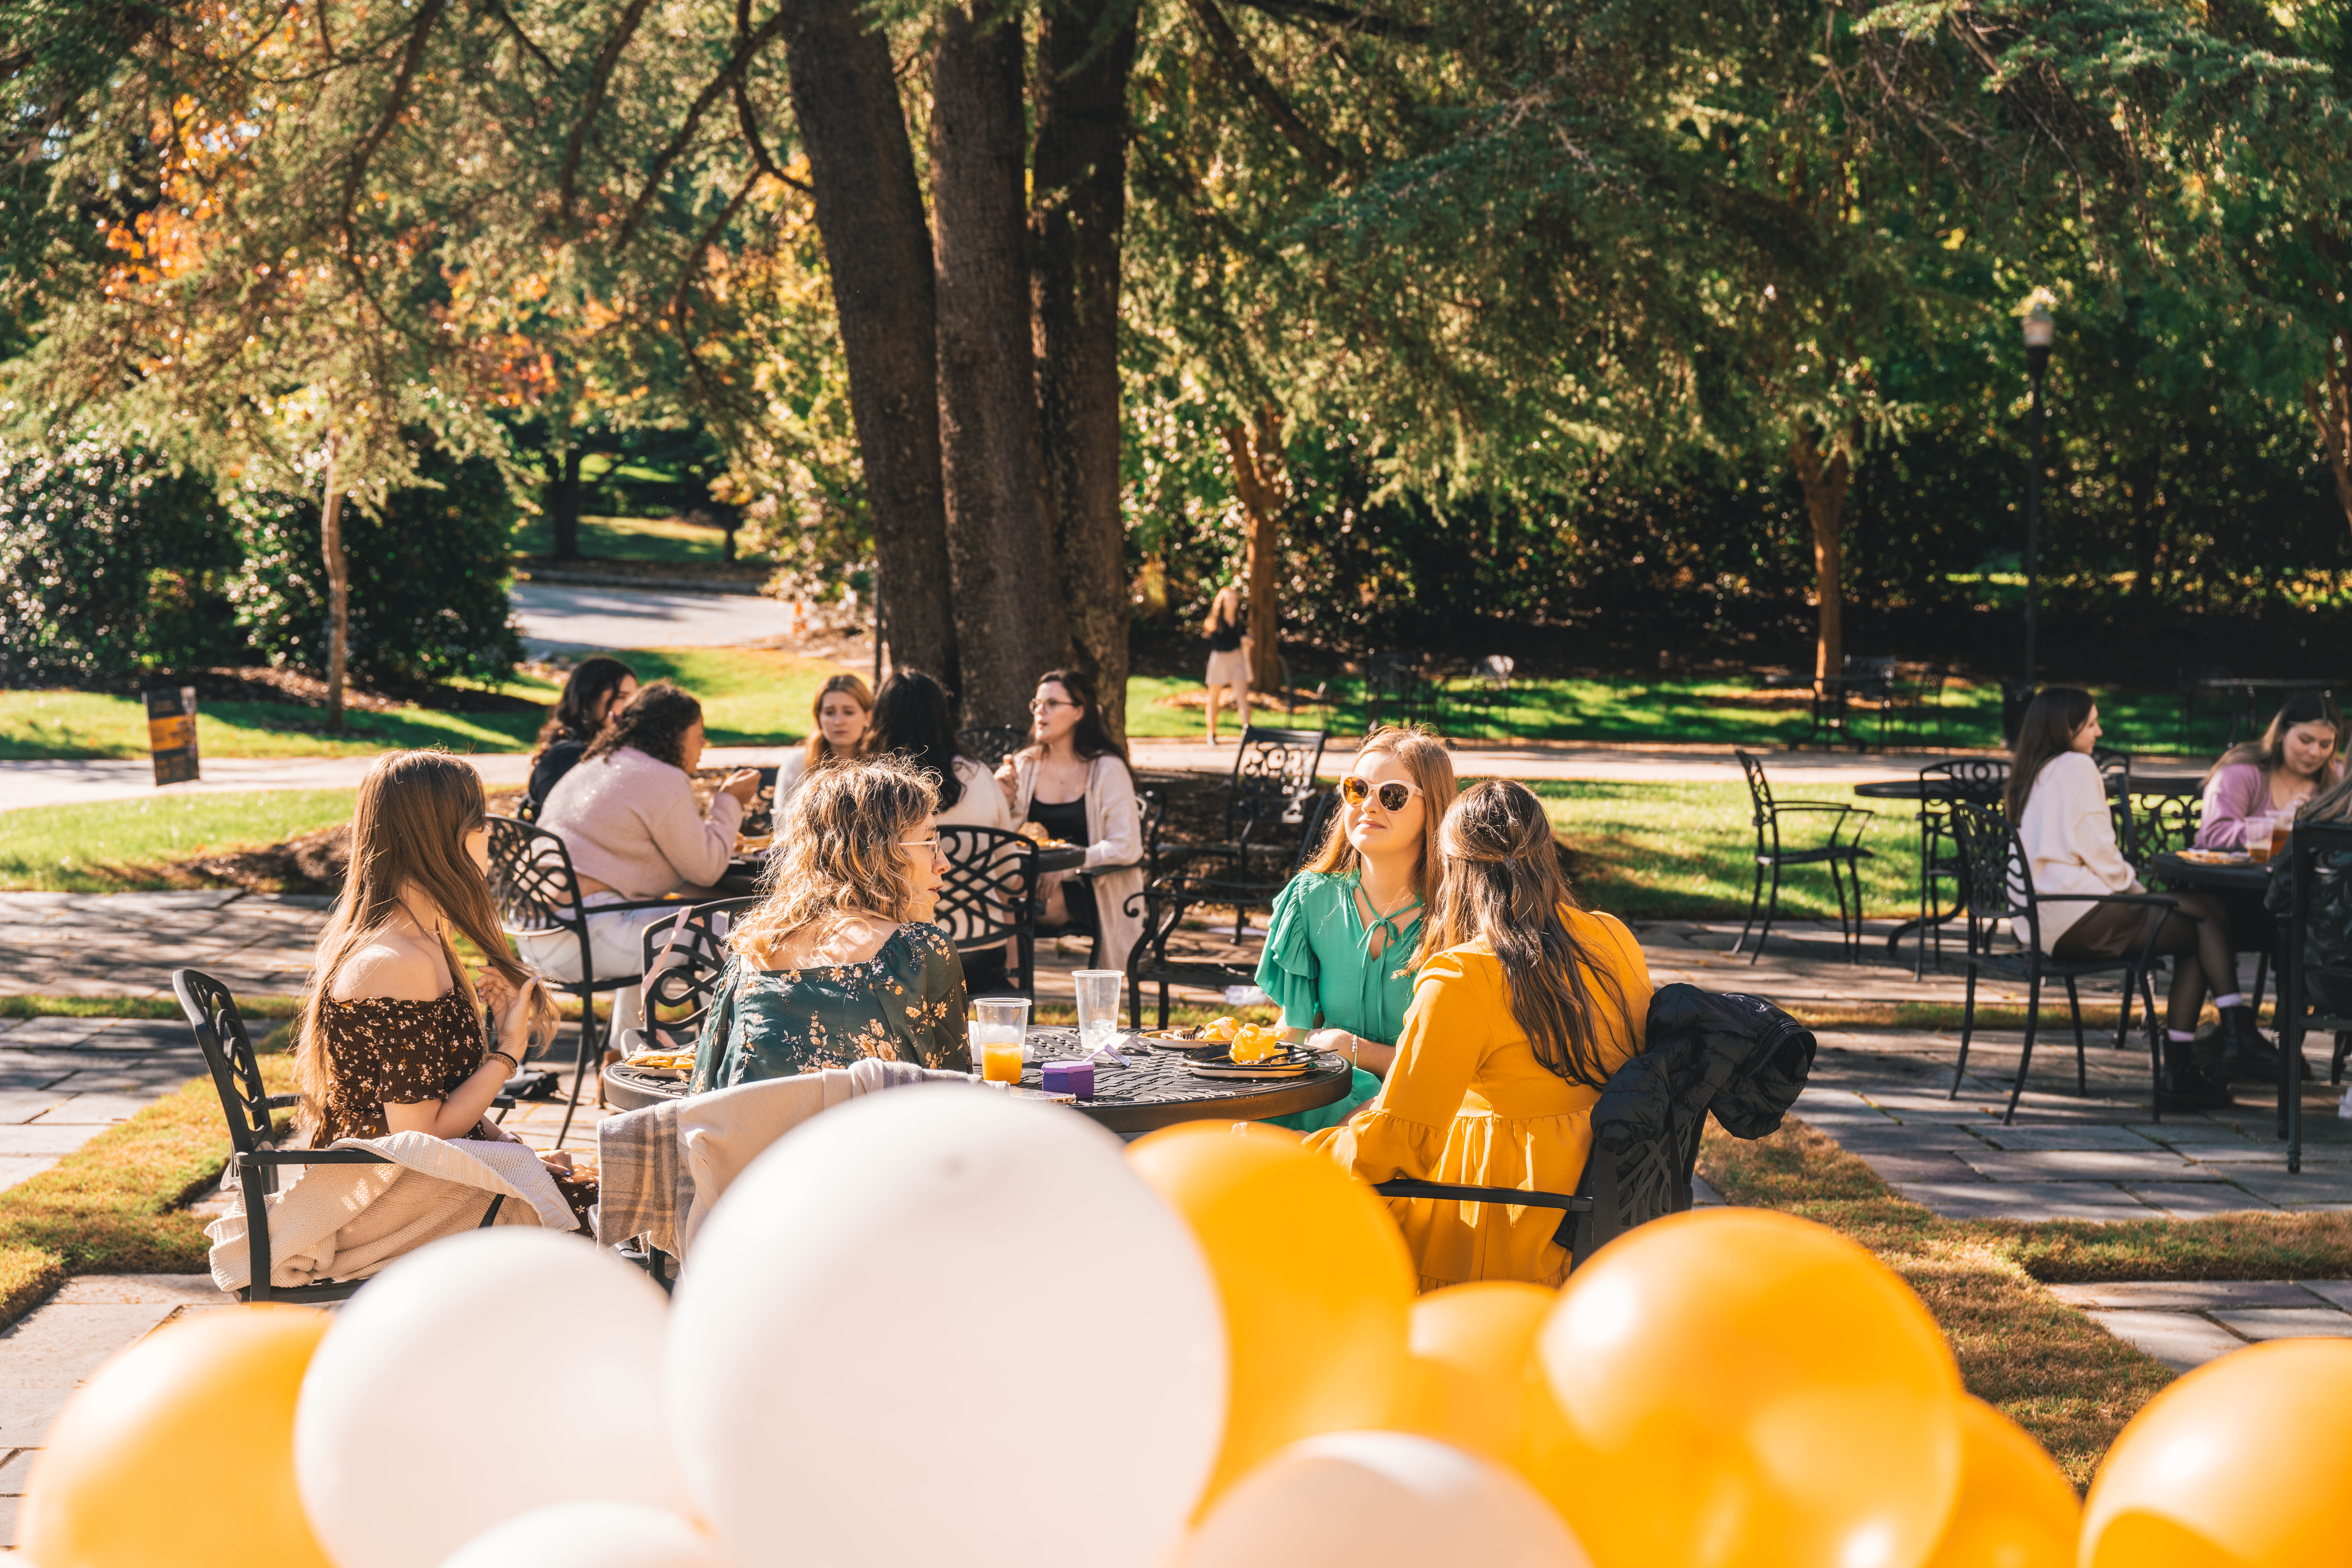 A group of women is seated at outdoor tables with fall trees in the background and white and yellow balloons in the foreground.